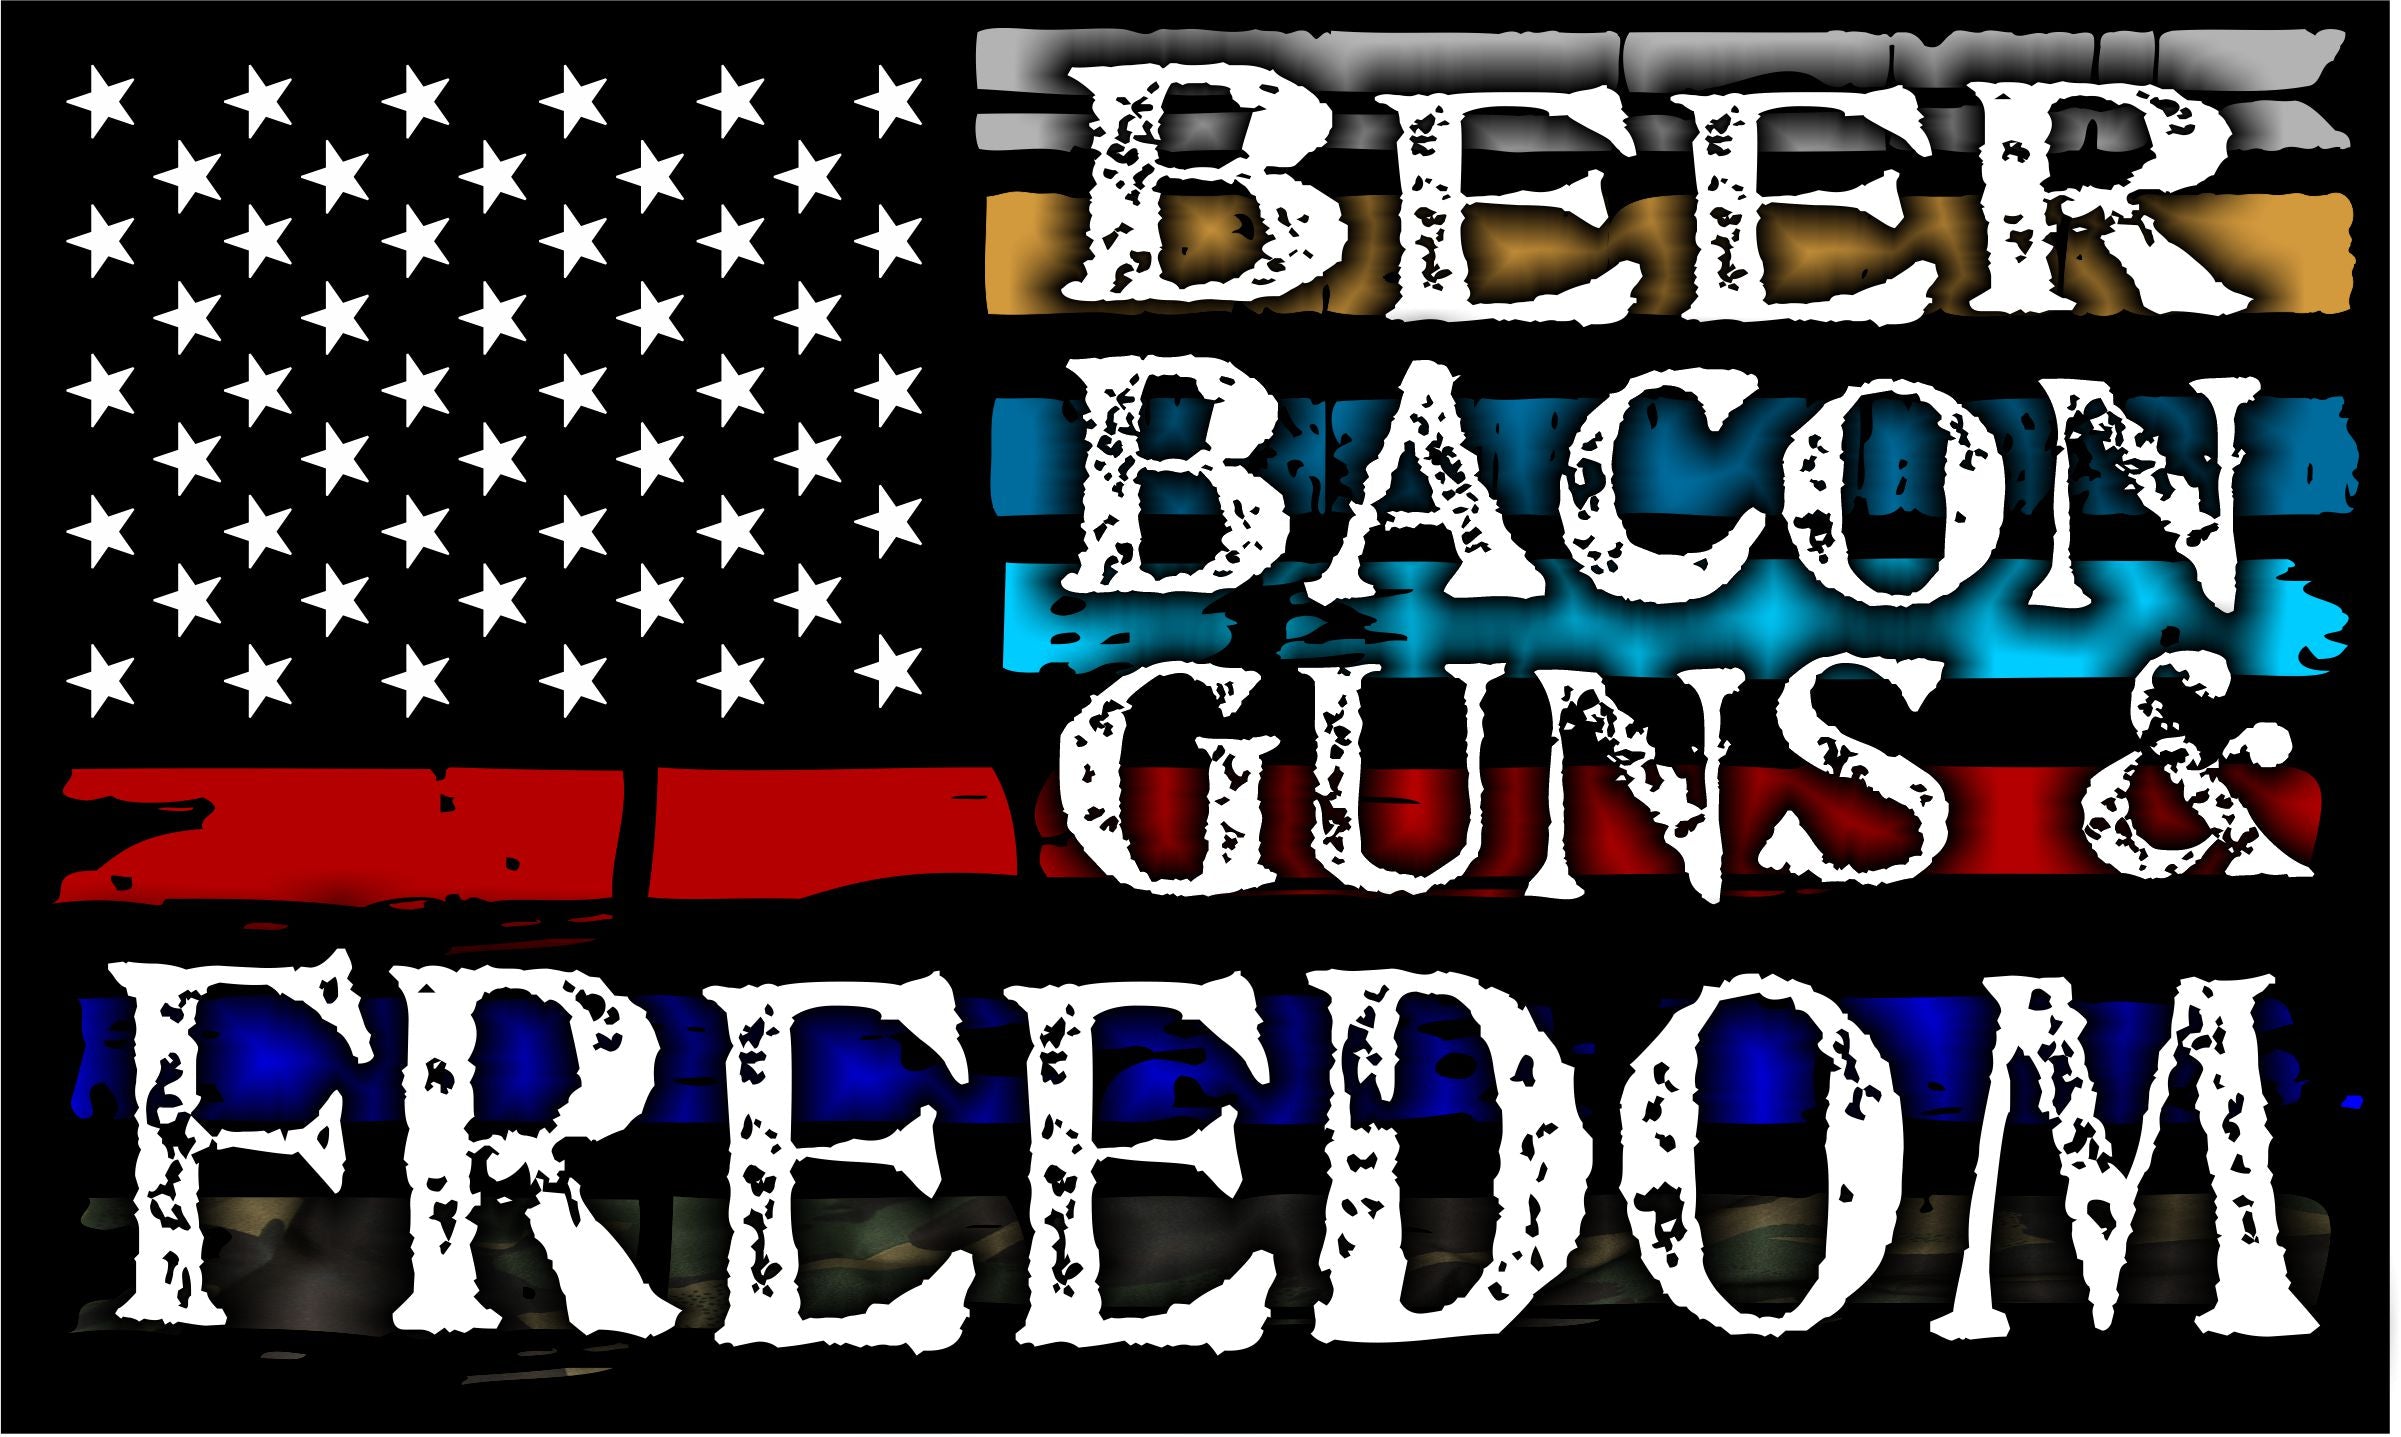 Beer Bacon Guns and Freedom Tattered Flag Decal - Powercall Sirens LLC